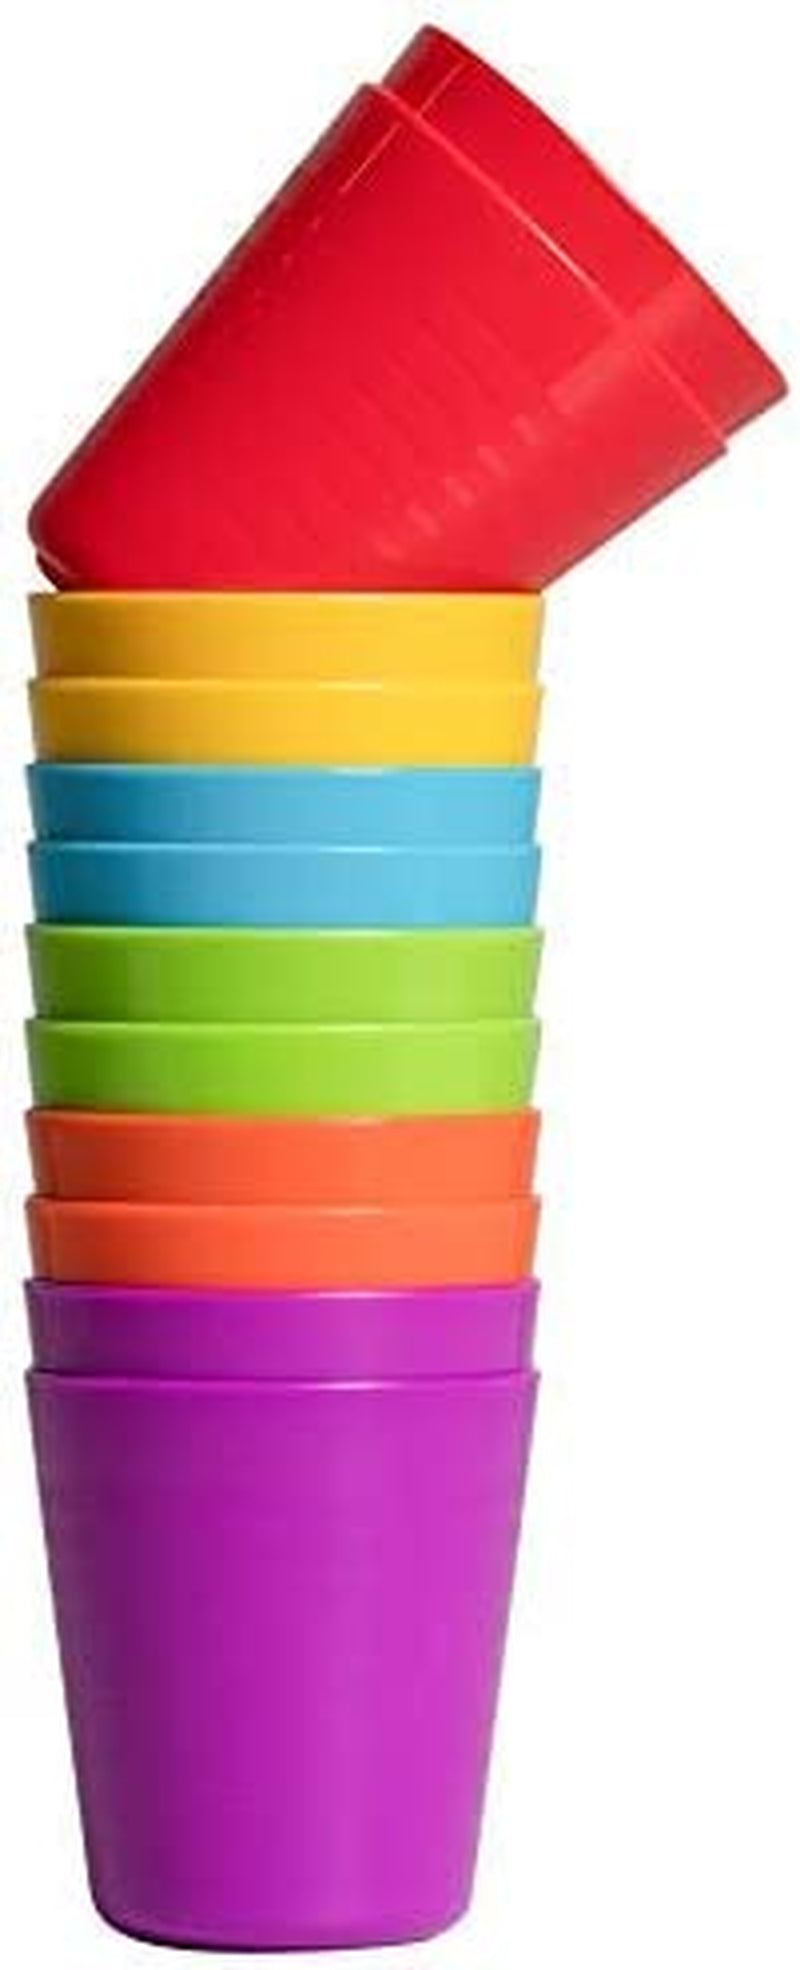 Klickpick Home - Set of 12 Kids Plastic Cups - 8 Oz Children Drinking Cups Tumblers Reusable - Dishwasher Safe - Bpa-Free Cups for Kids & Toddlers Bright Colored - Unbreakable Toddler Cups